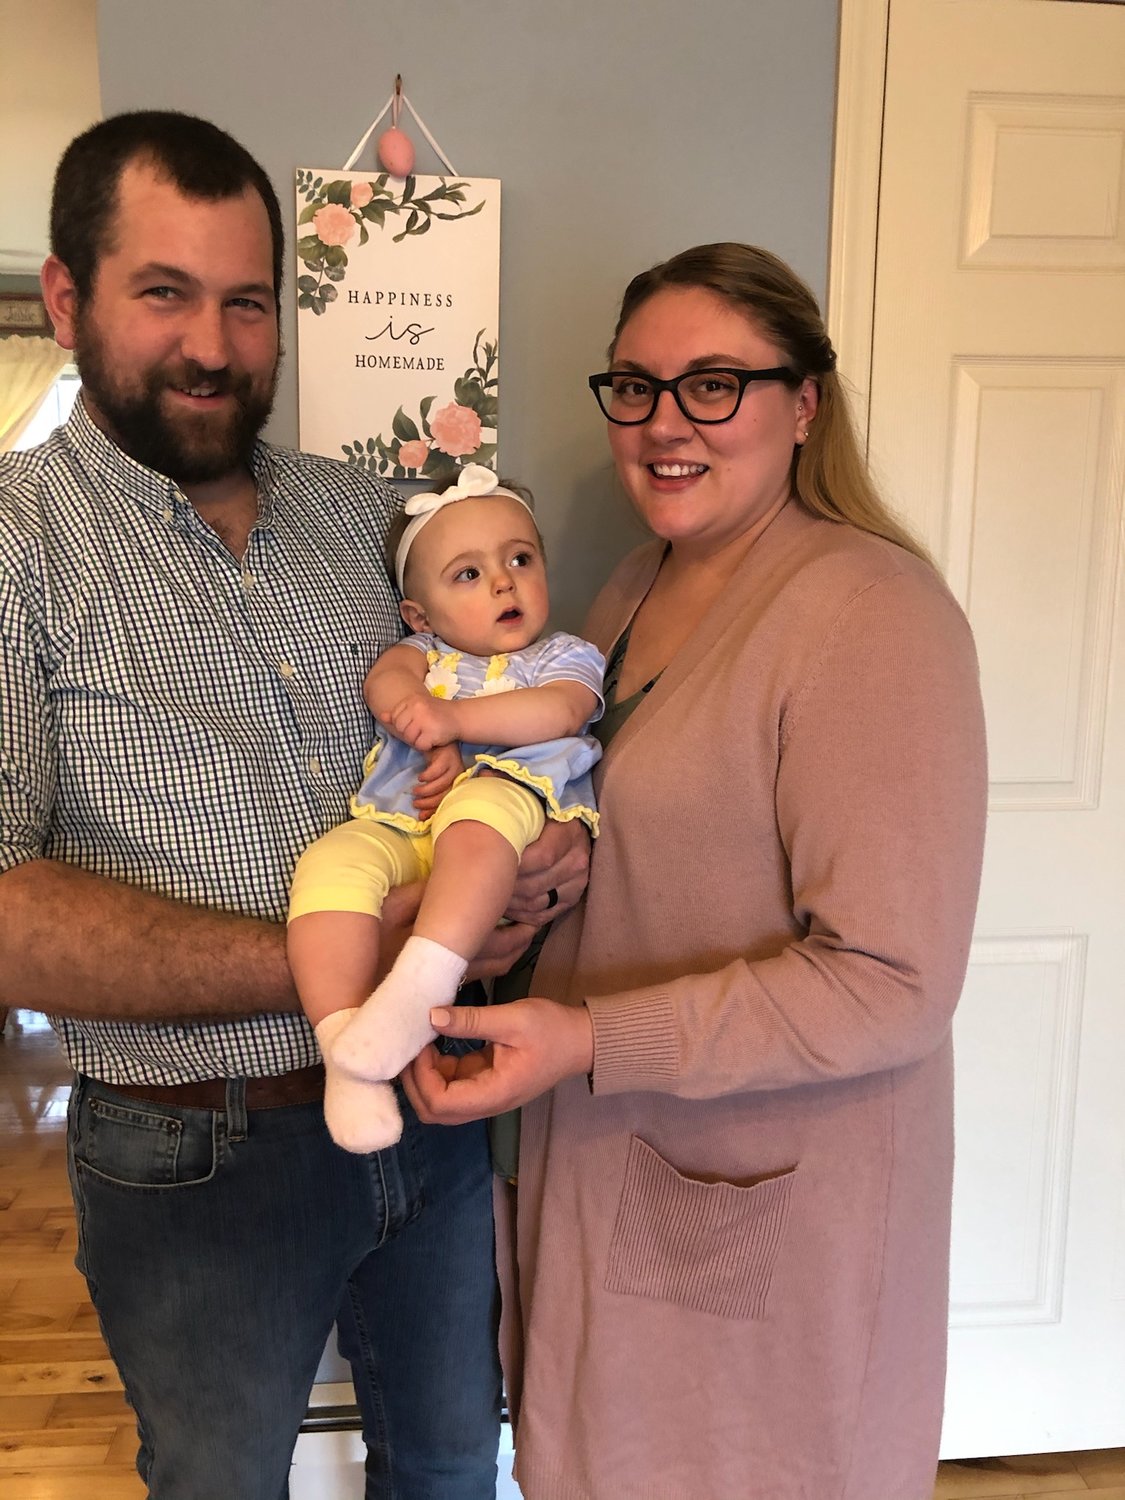 OVERCOMING CHALLENGES — Cory and Rachael Hurlbut enjoy some time with daughter, Sloane Rose, recently. November is National Premature Birth Awareness Month, and the Hurlbuts shared their story of their daughter’s premature birth in the hope of helping others facing a similar journey.